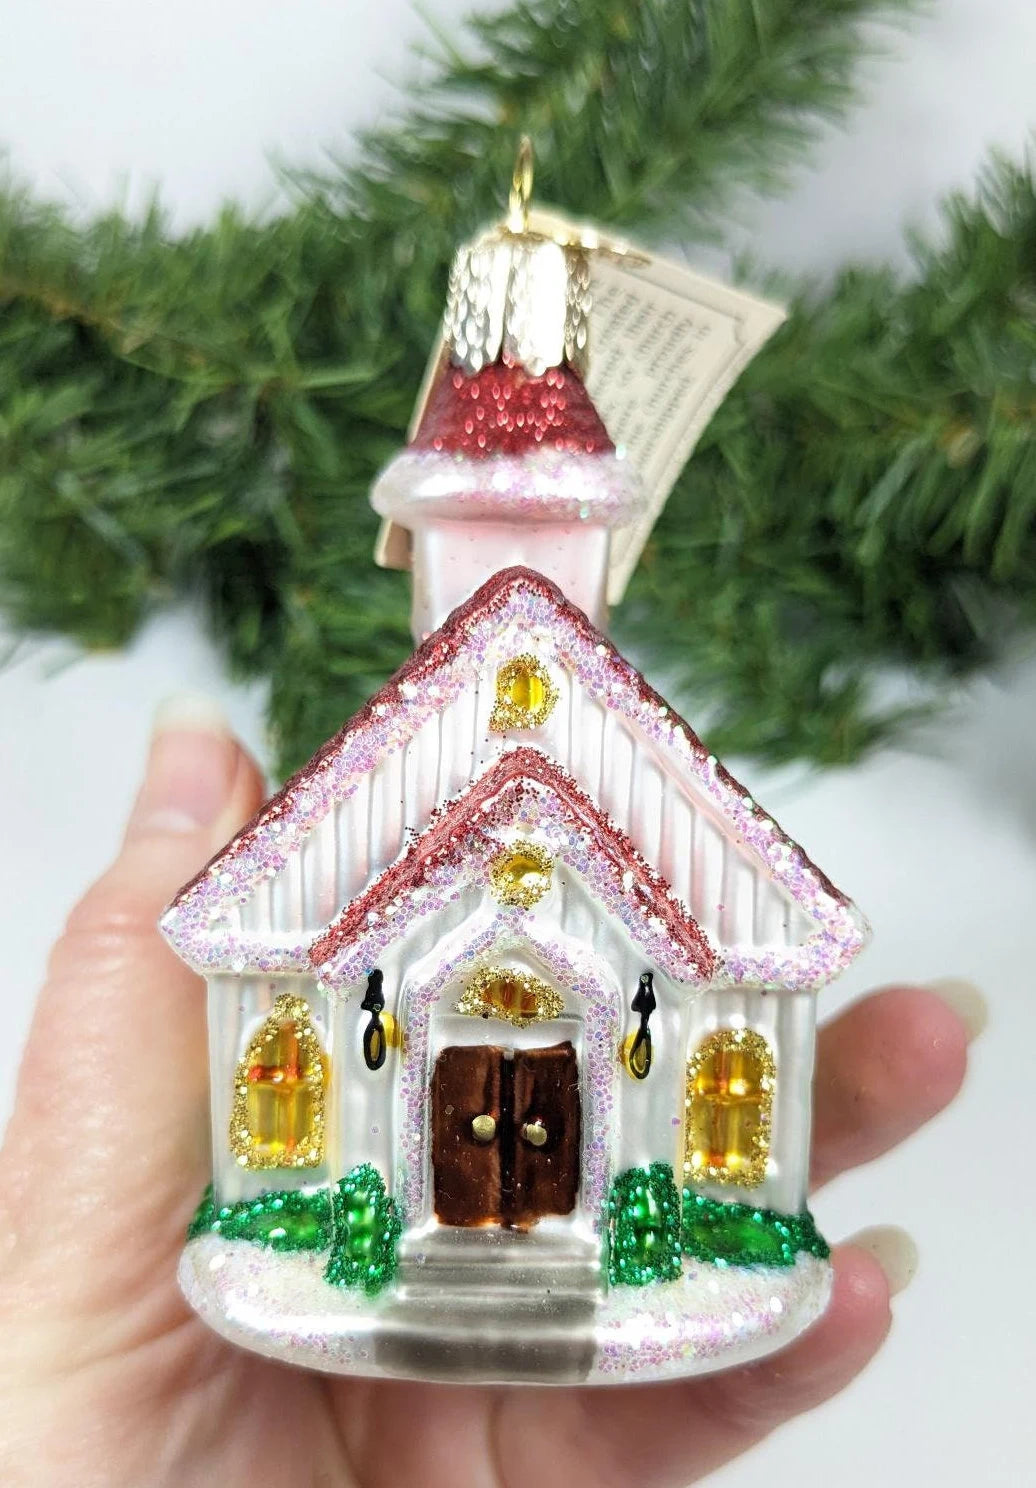 The Country Church Retired Old World Christmas Ornament